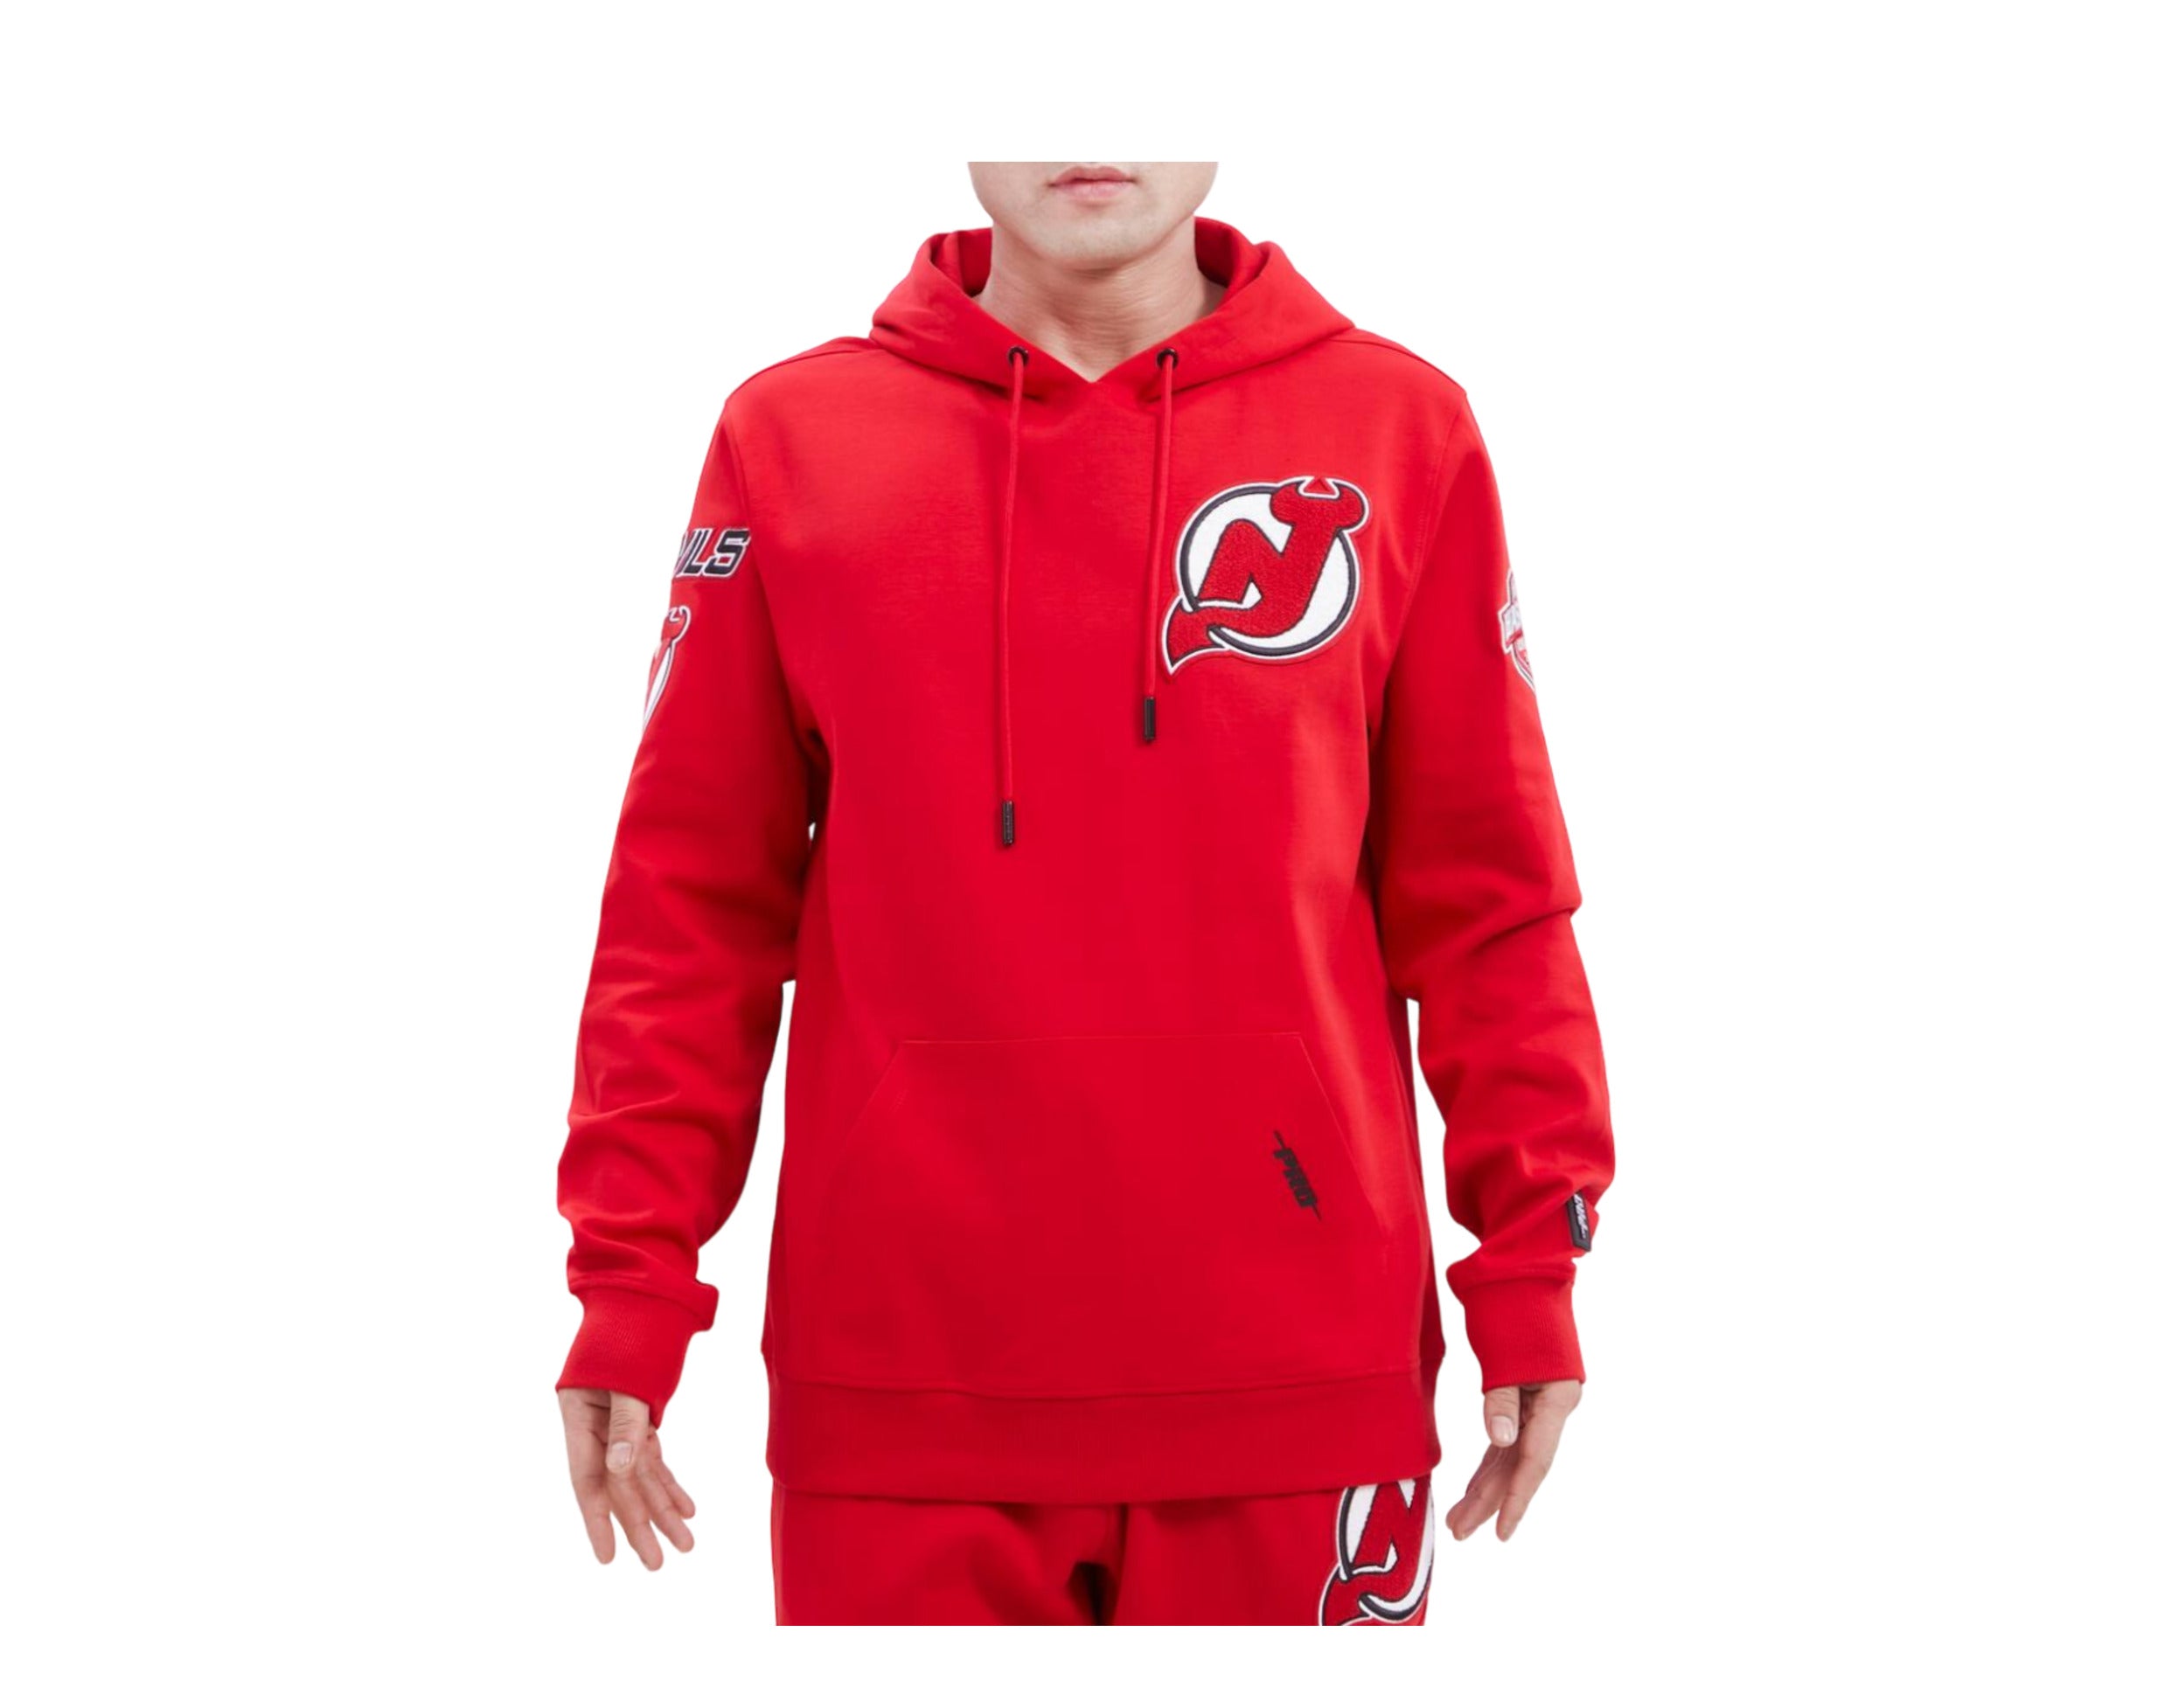 New Jersey Devils Official NHL Sweatpants